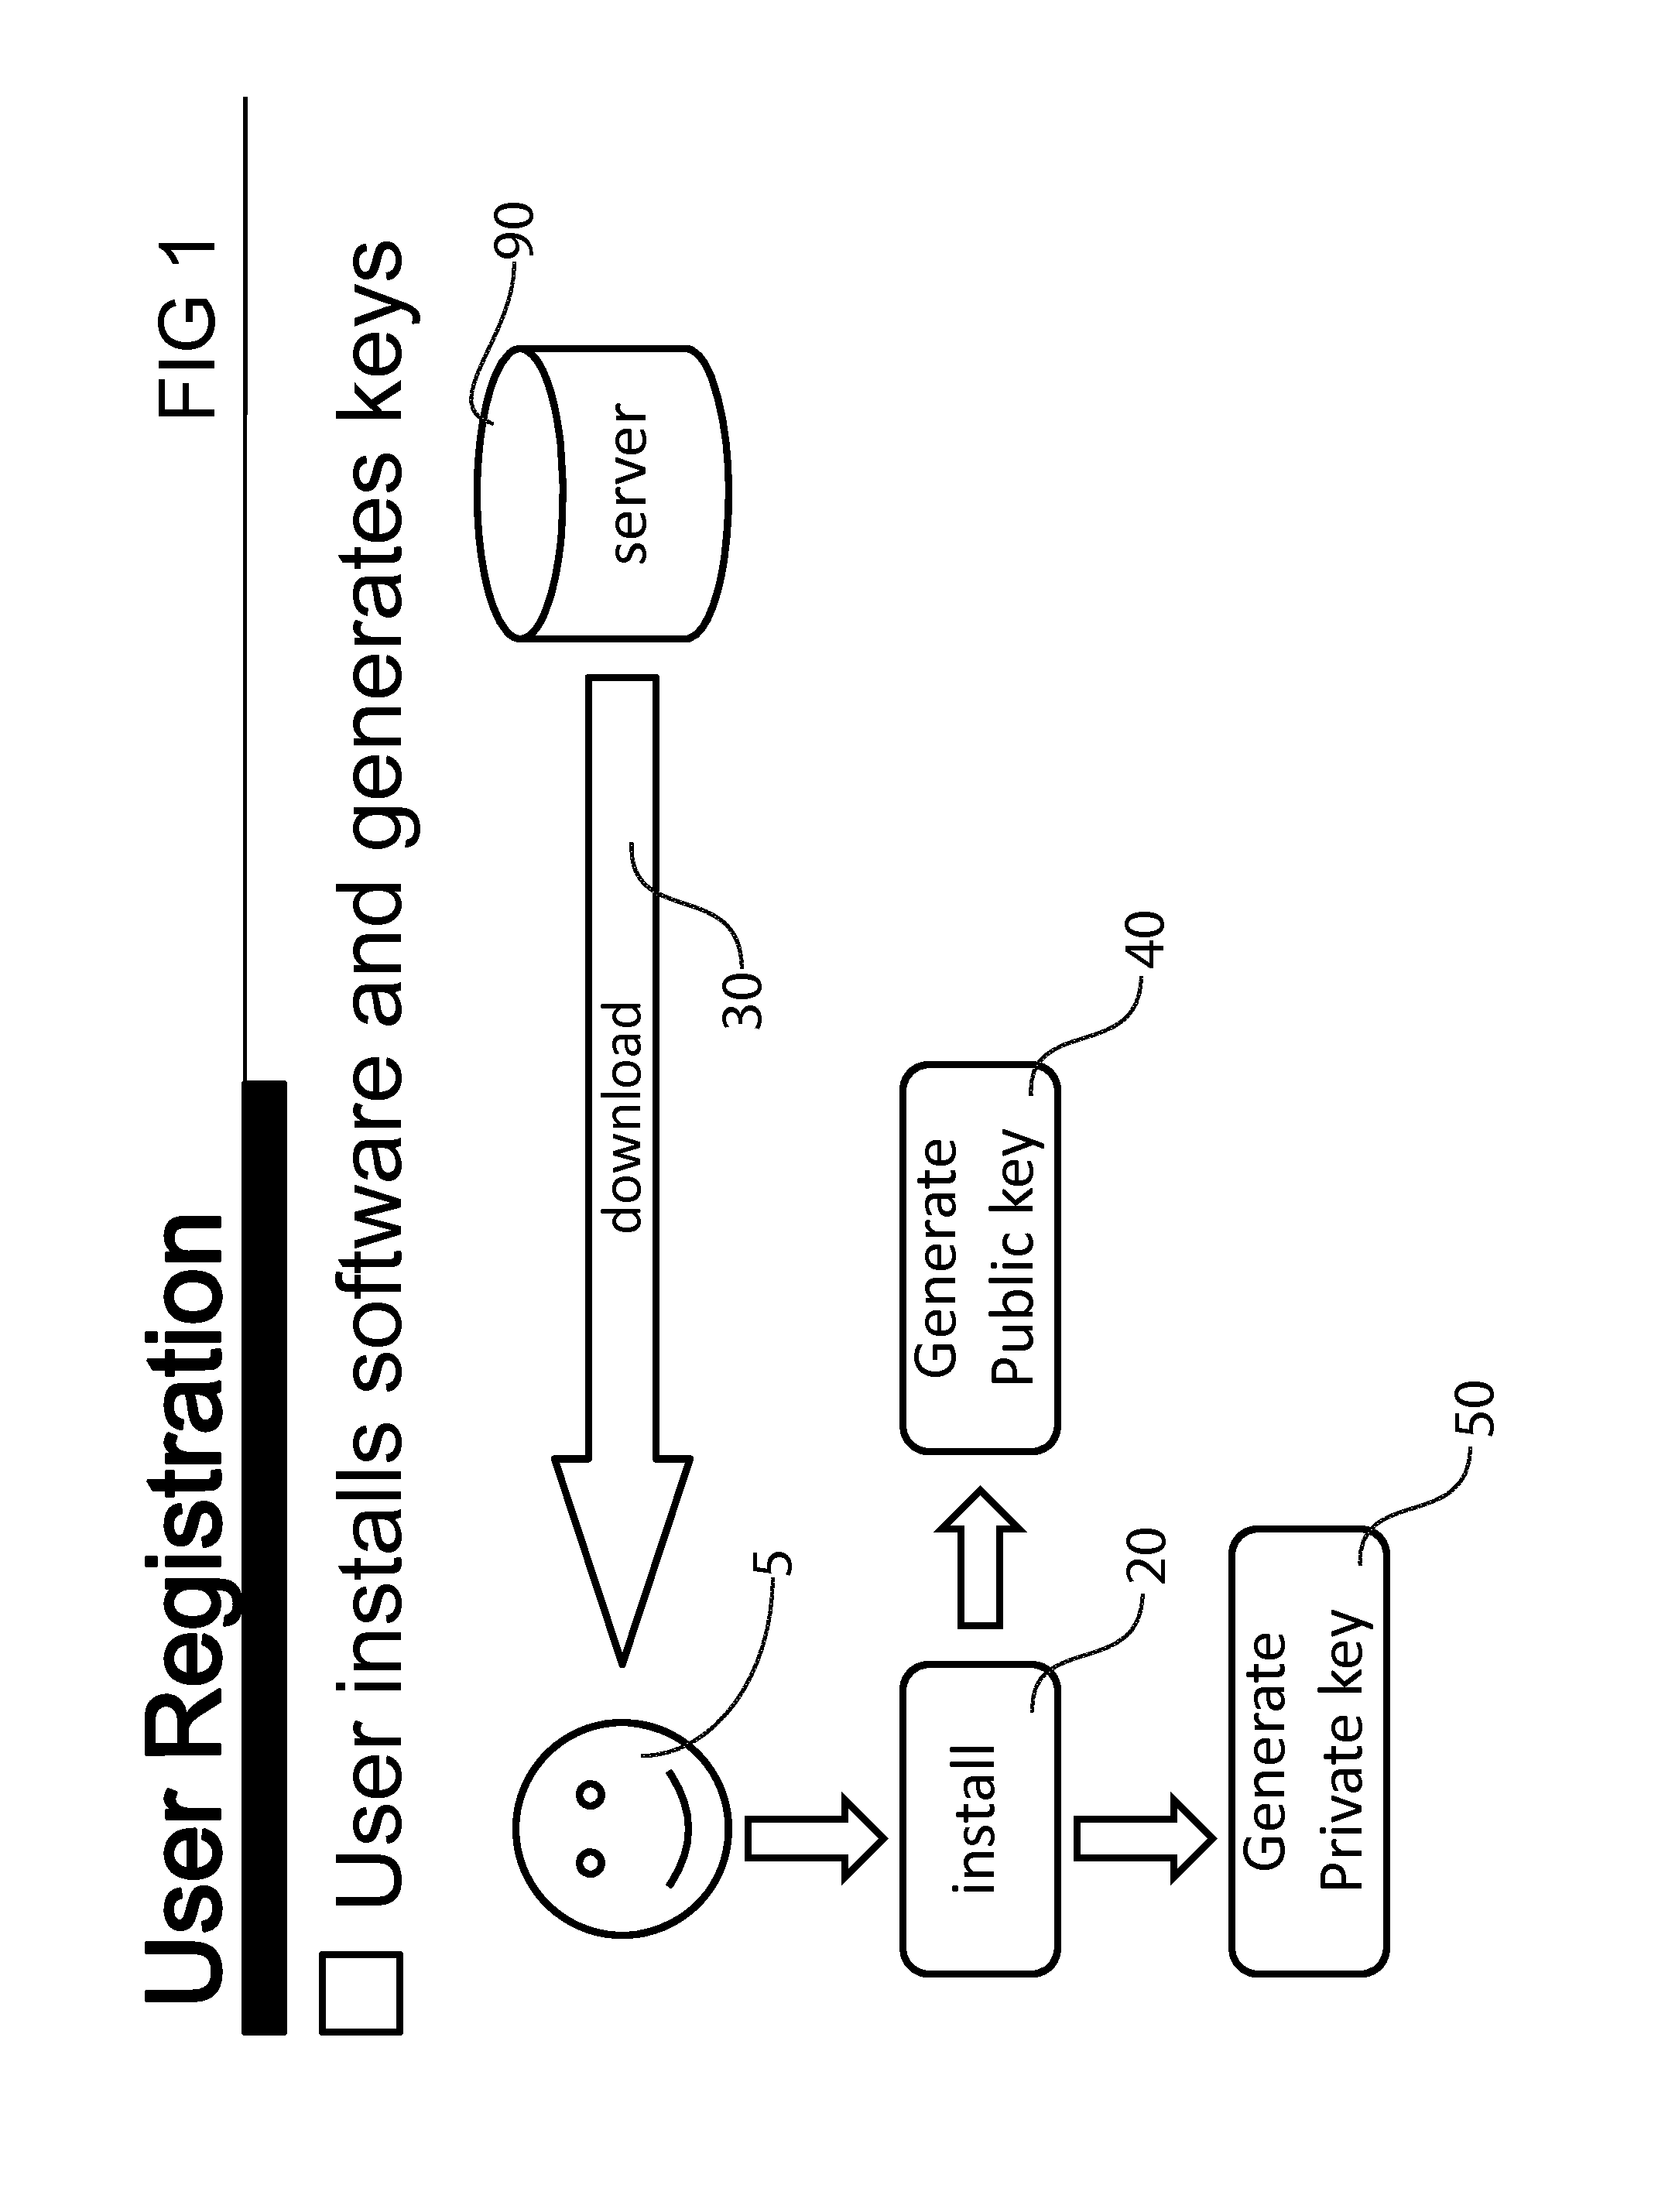 Method and apparatus for securely transmitting communication between multiple users